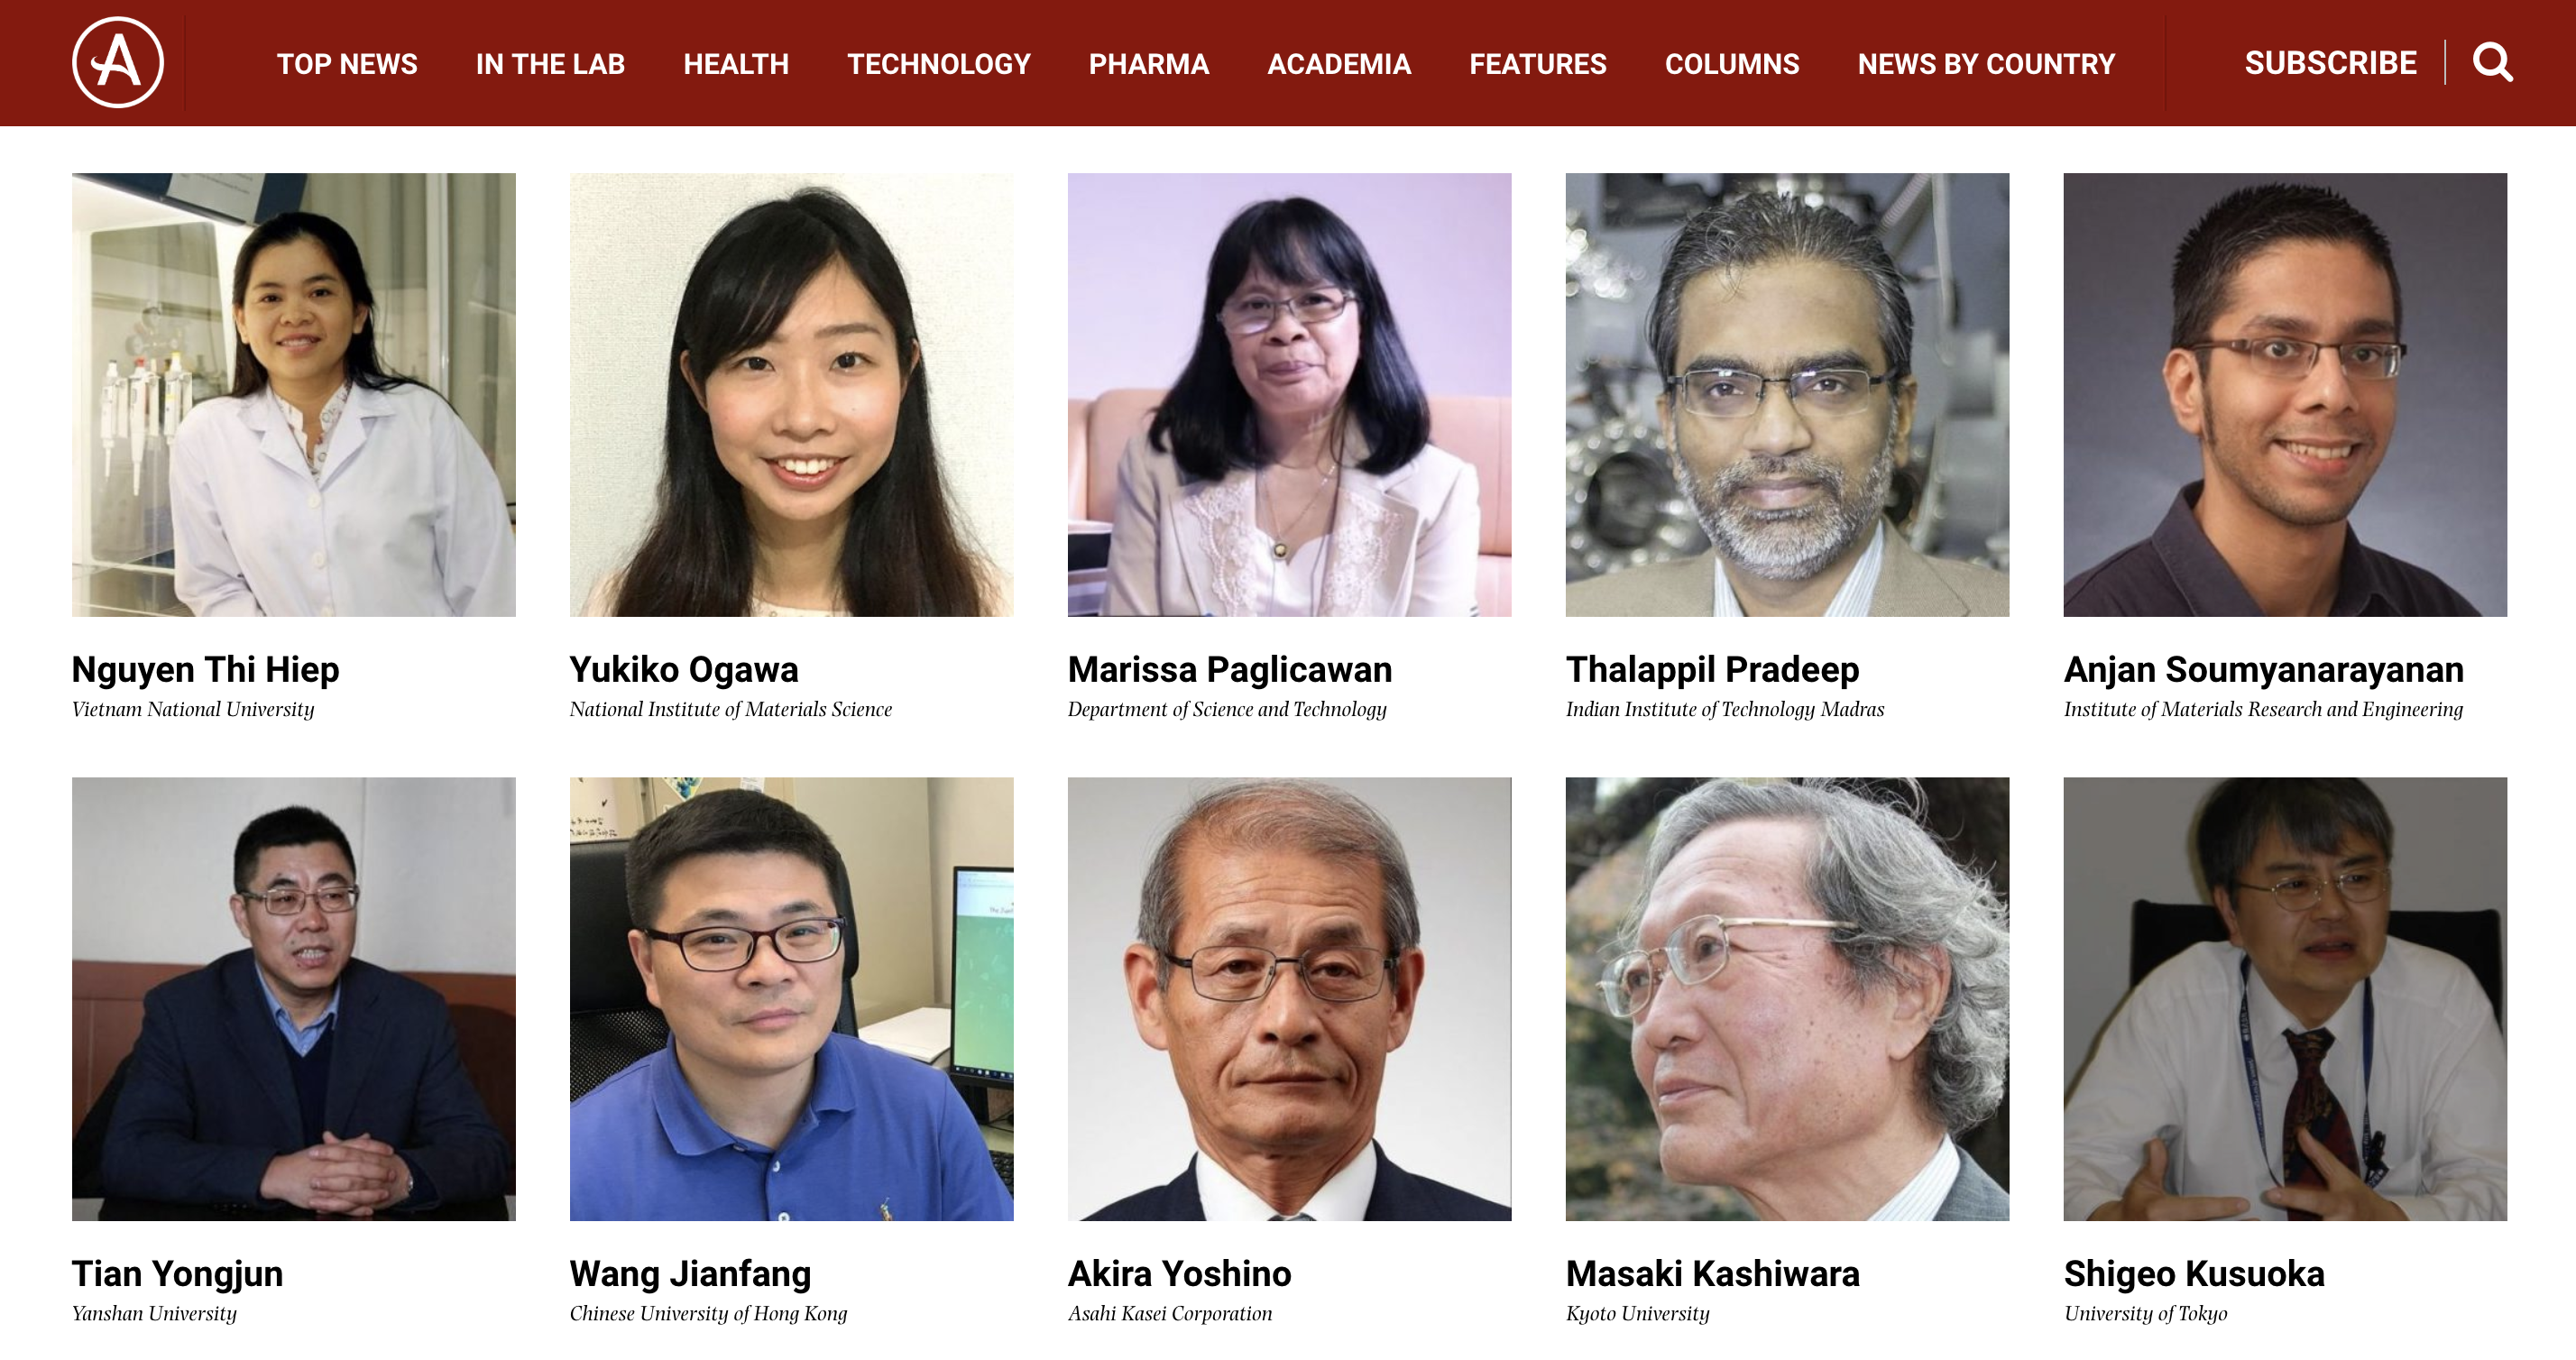 Nguyen Thi Hiep, Ph.D. is seen on Asian Scientist 100’s page. Photo: screen capture